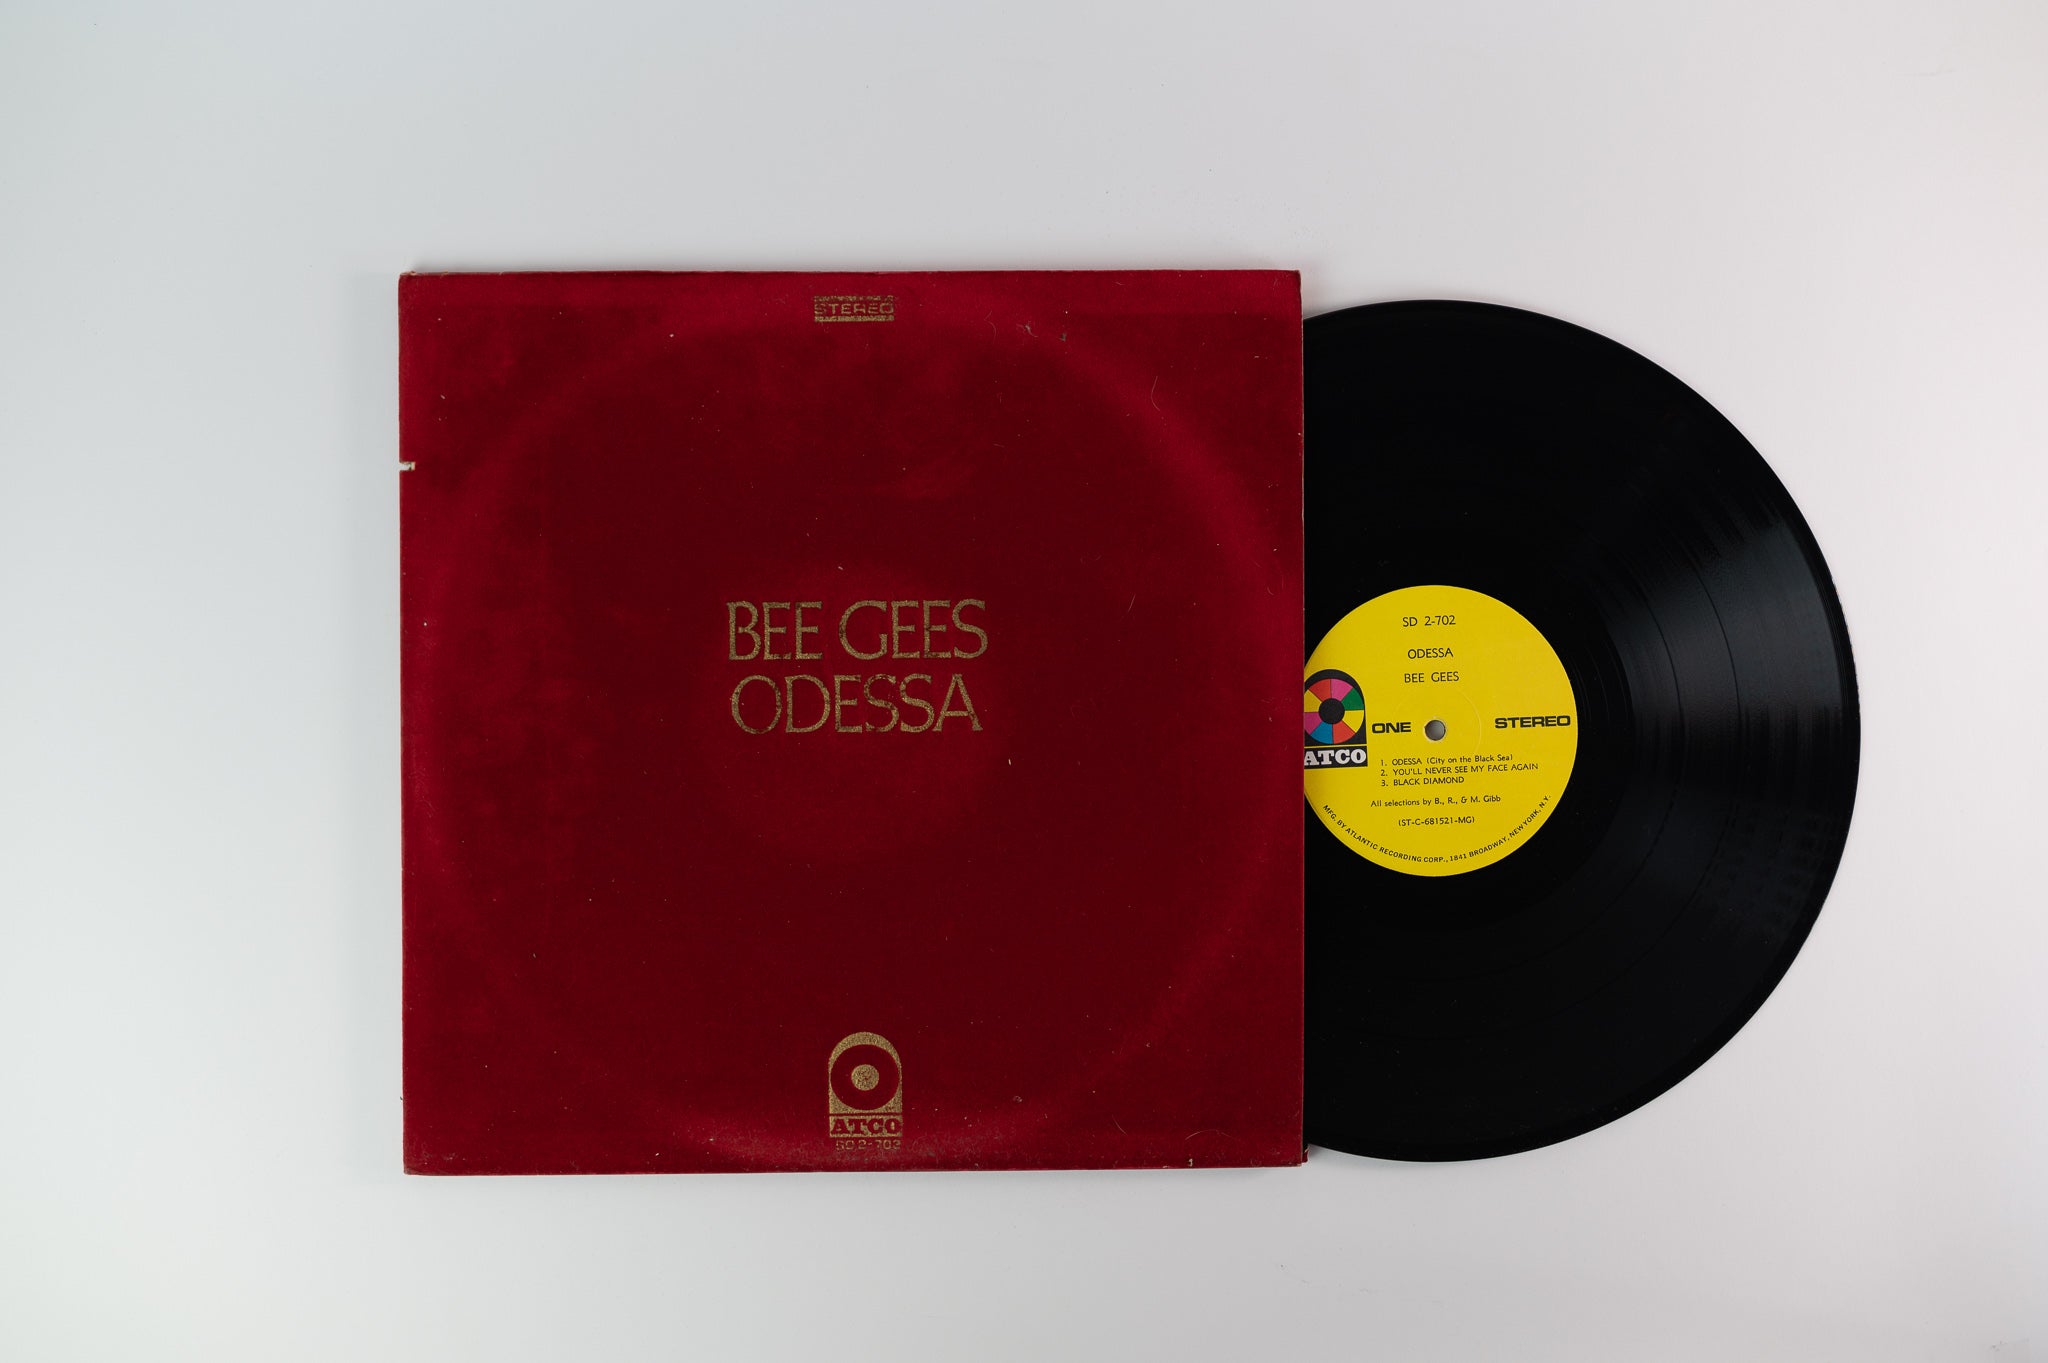 Bee Gees - Odessa on Atco Felt Cover First Press